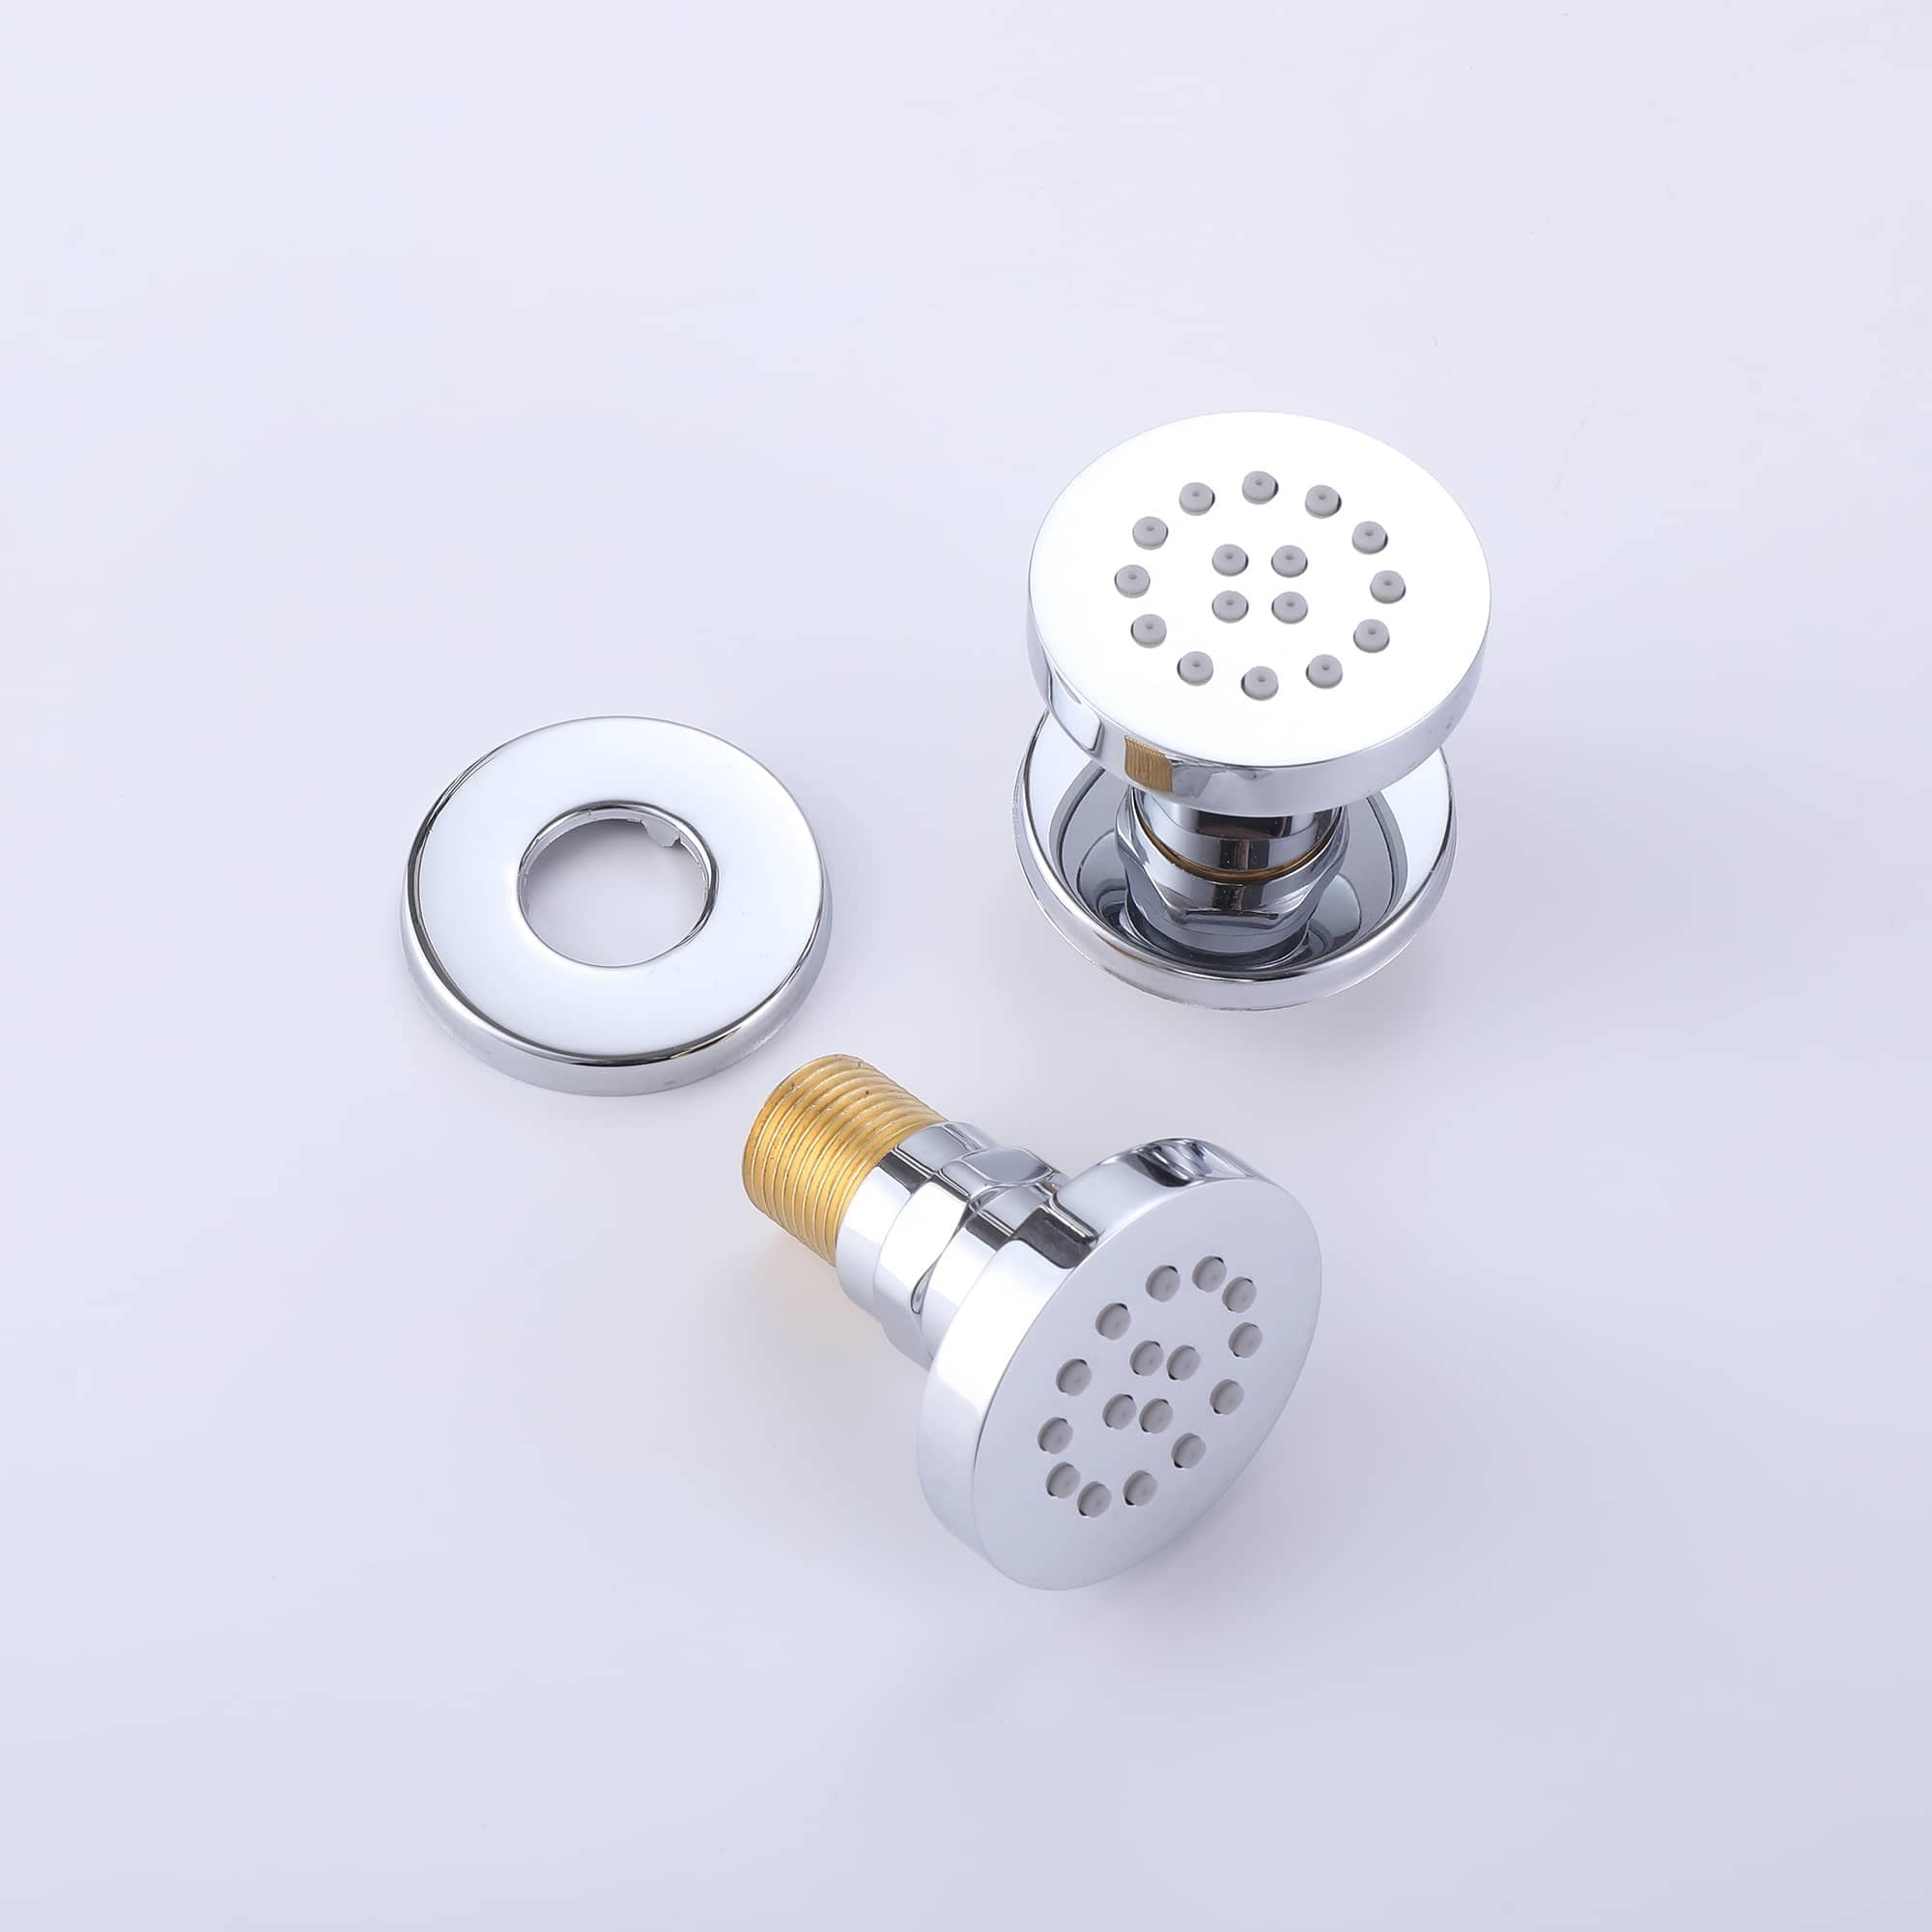 https://ak1.ostkcdn.com/images/products/is/images/direct/cd4c01a57efd239e16a988d3f079b917c937dc5c/Thermostatic-Shower-System-With-Rough-in-Valve-Wall-Mount-Shower-Faucet-With-Body-Jet-And-Hand-Shower-12-Inch-Shower-Head-Set.jpg